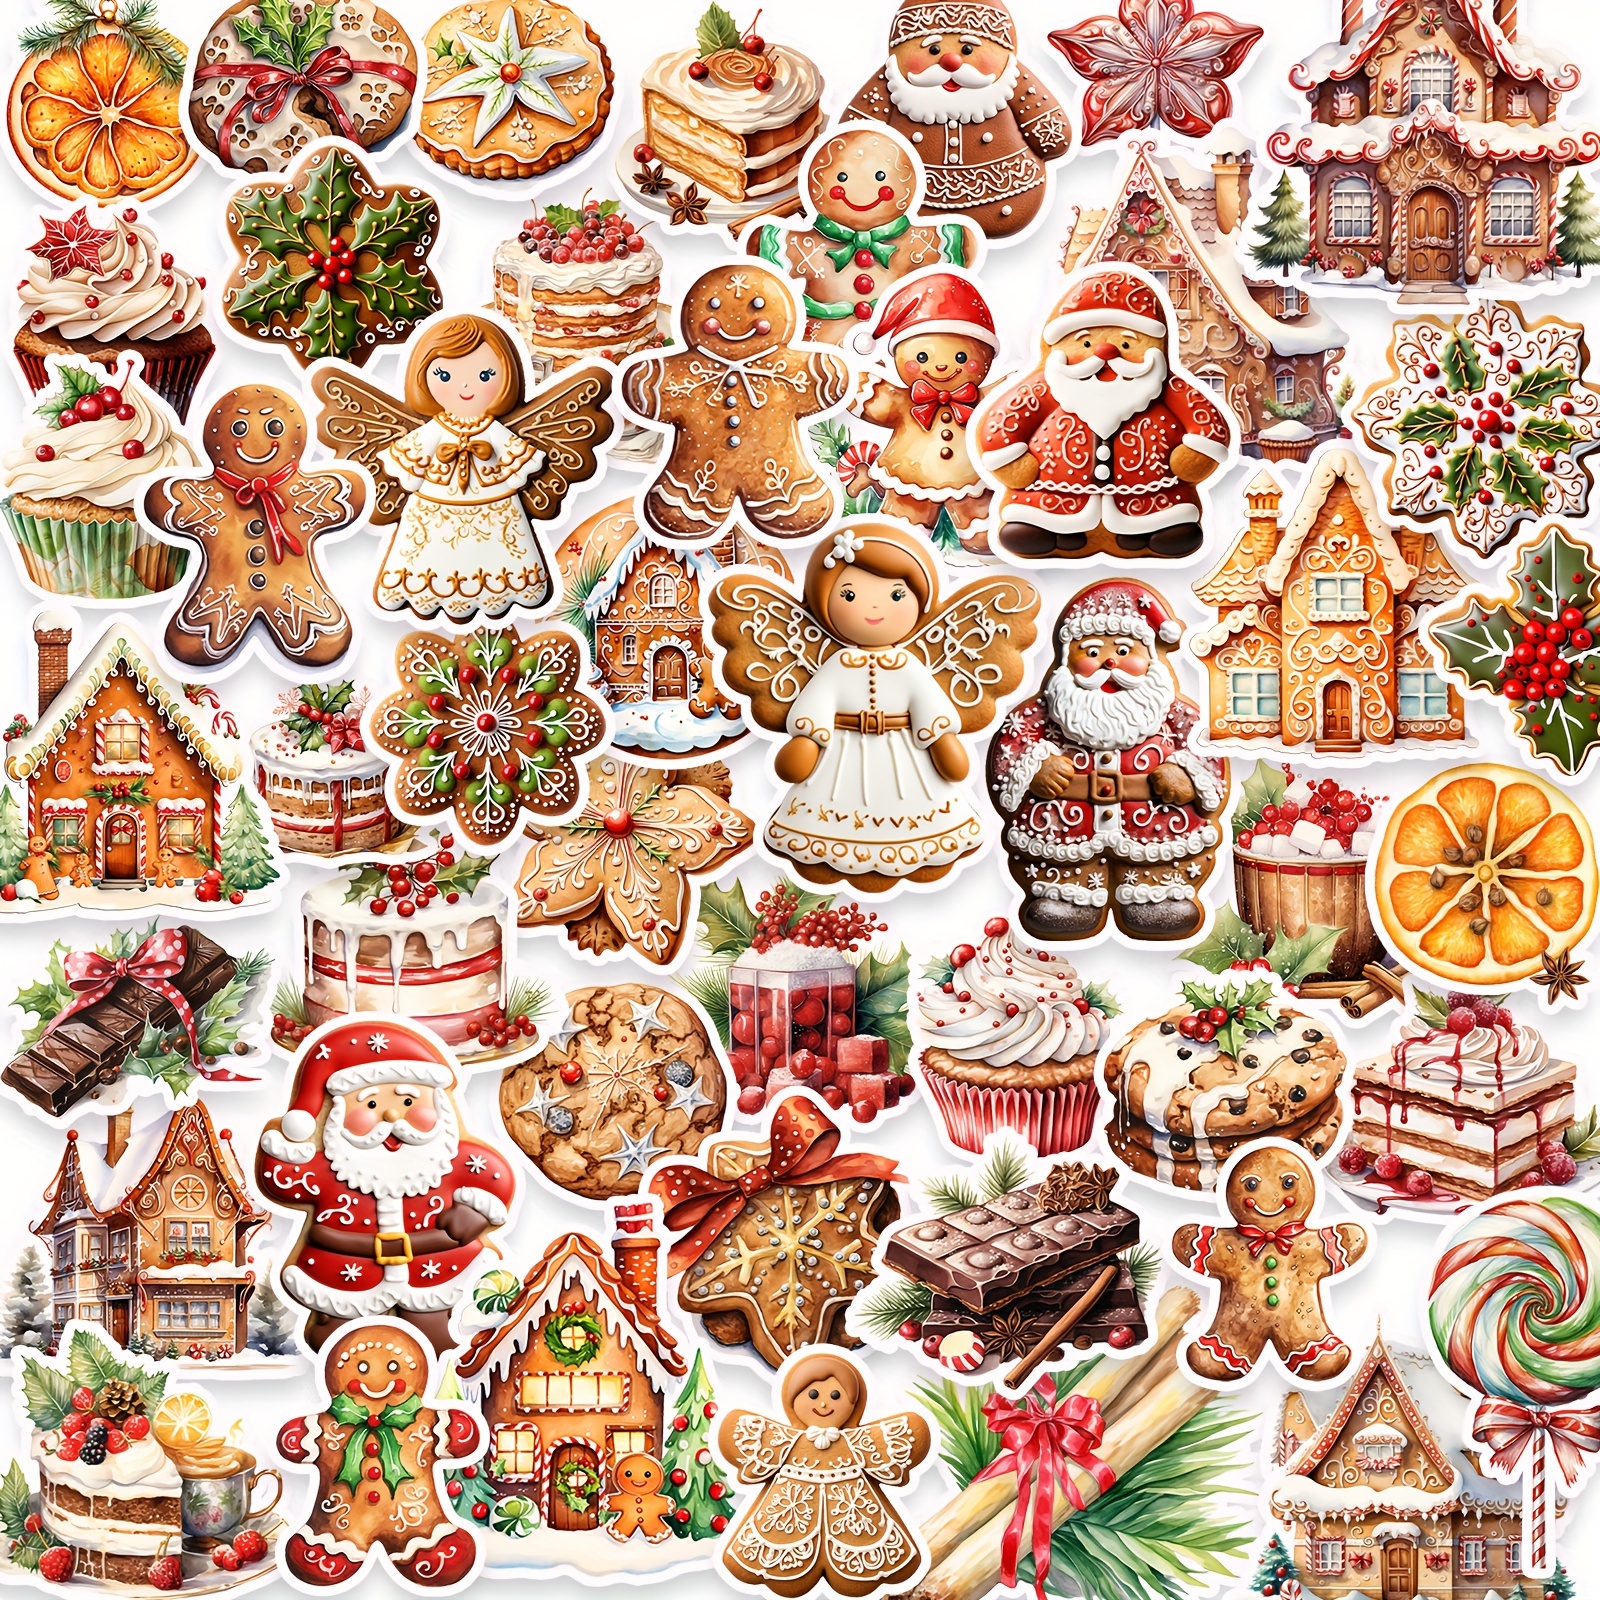 Christmas Gingerbread Man Candy Window Stickers High-Quality Material Decorative Stickers for Creative Christmas Holiday Gifts